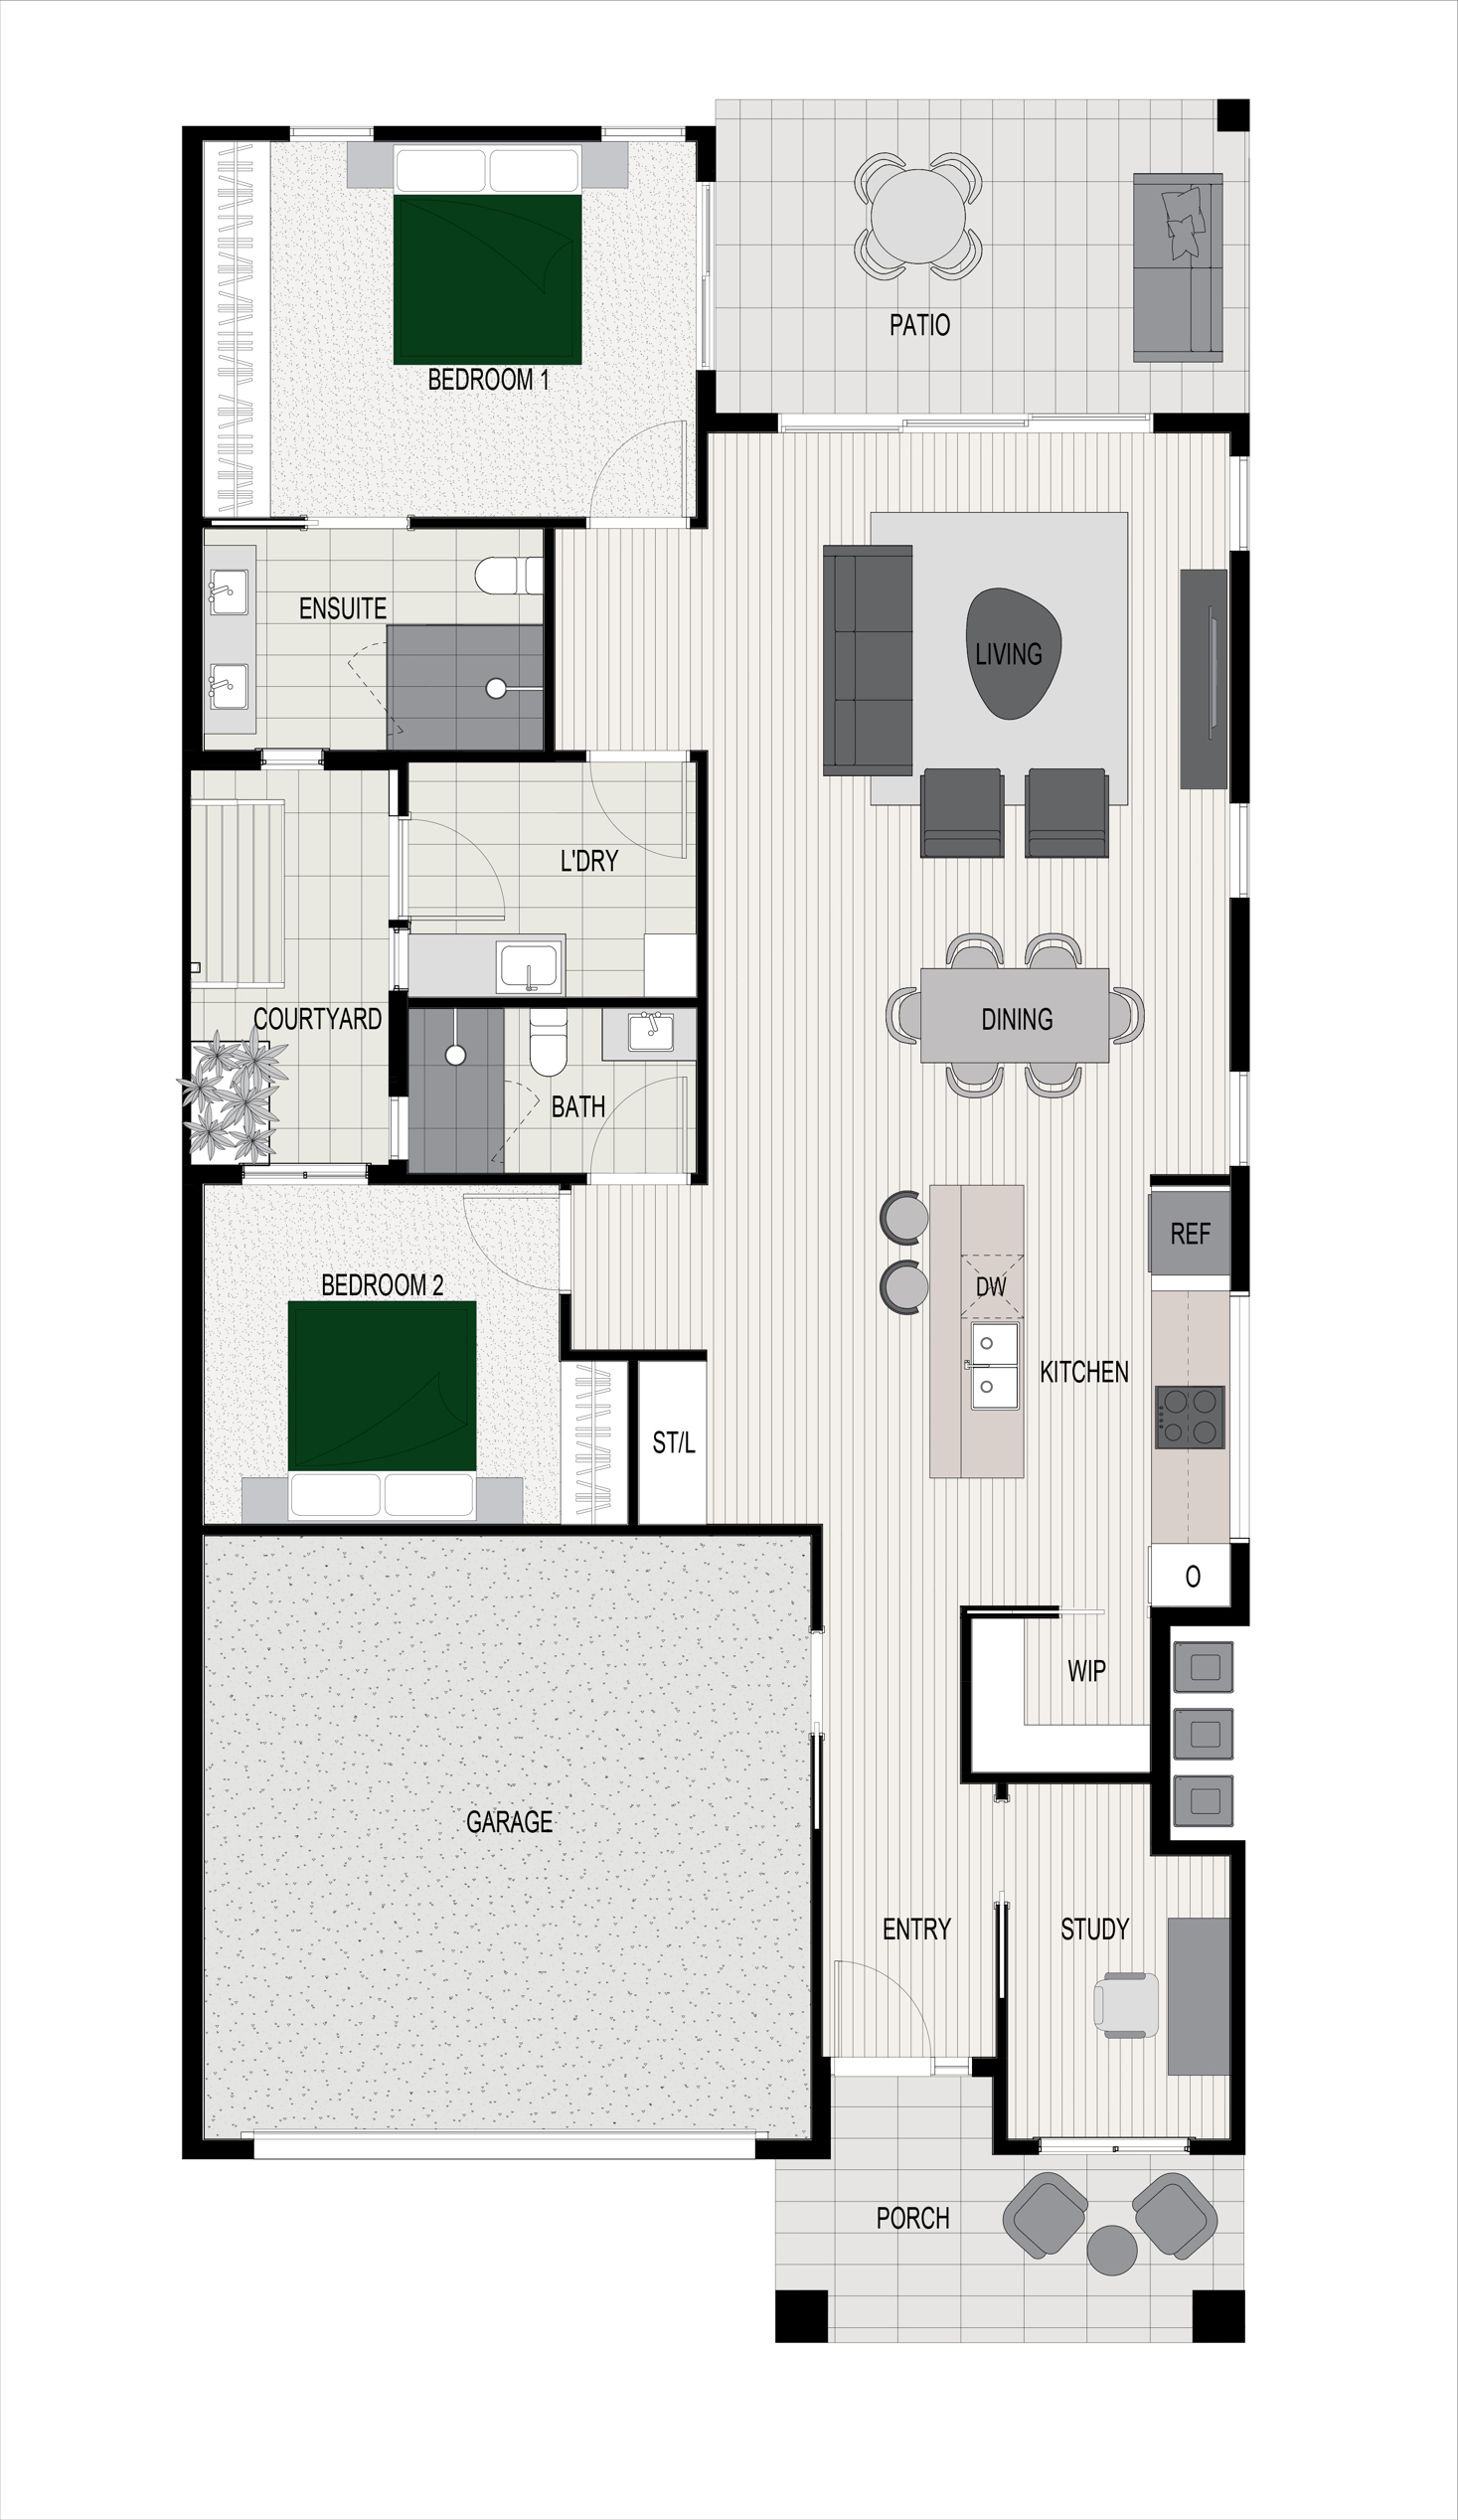 Floorplan of the Byron H9 house design, located at Stockland Halcyon Gables in The Hills district. 